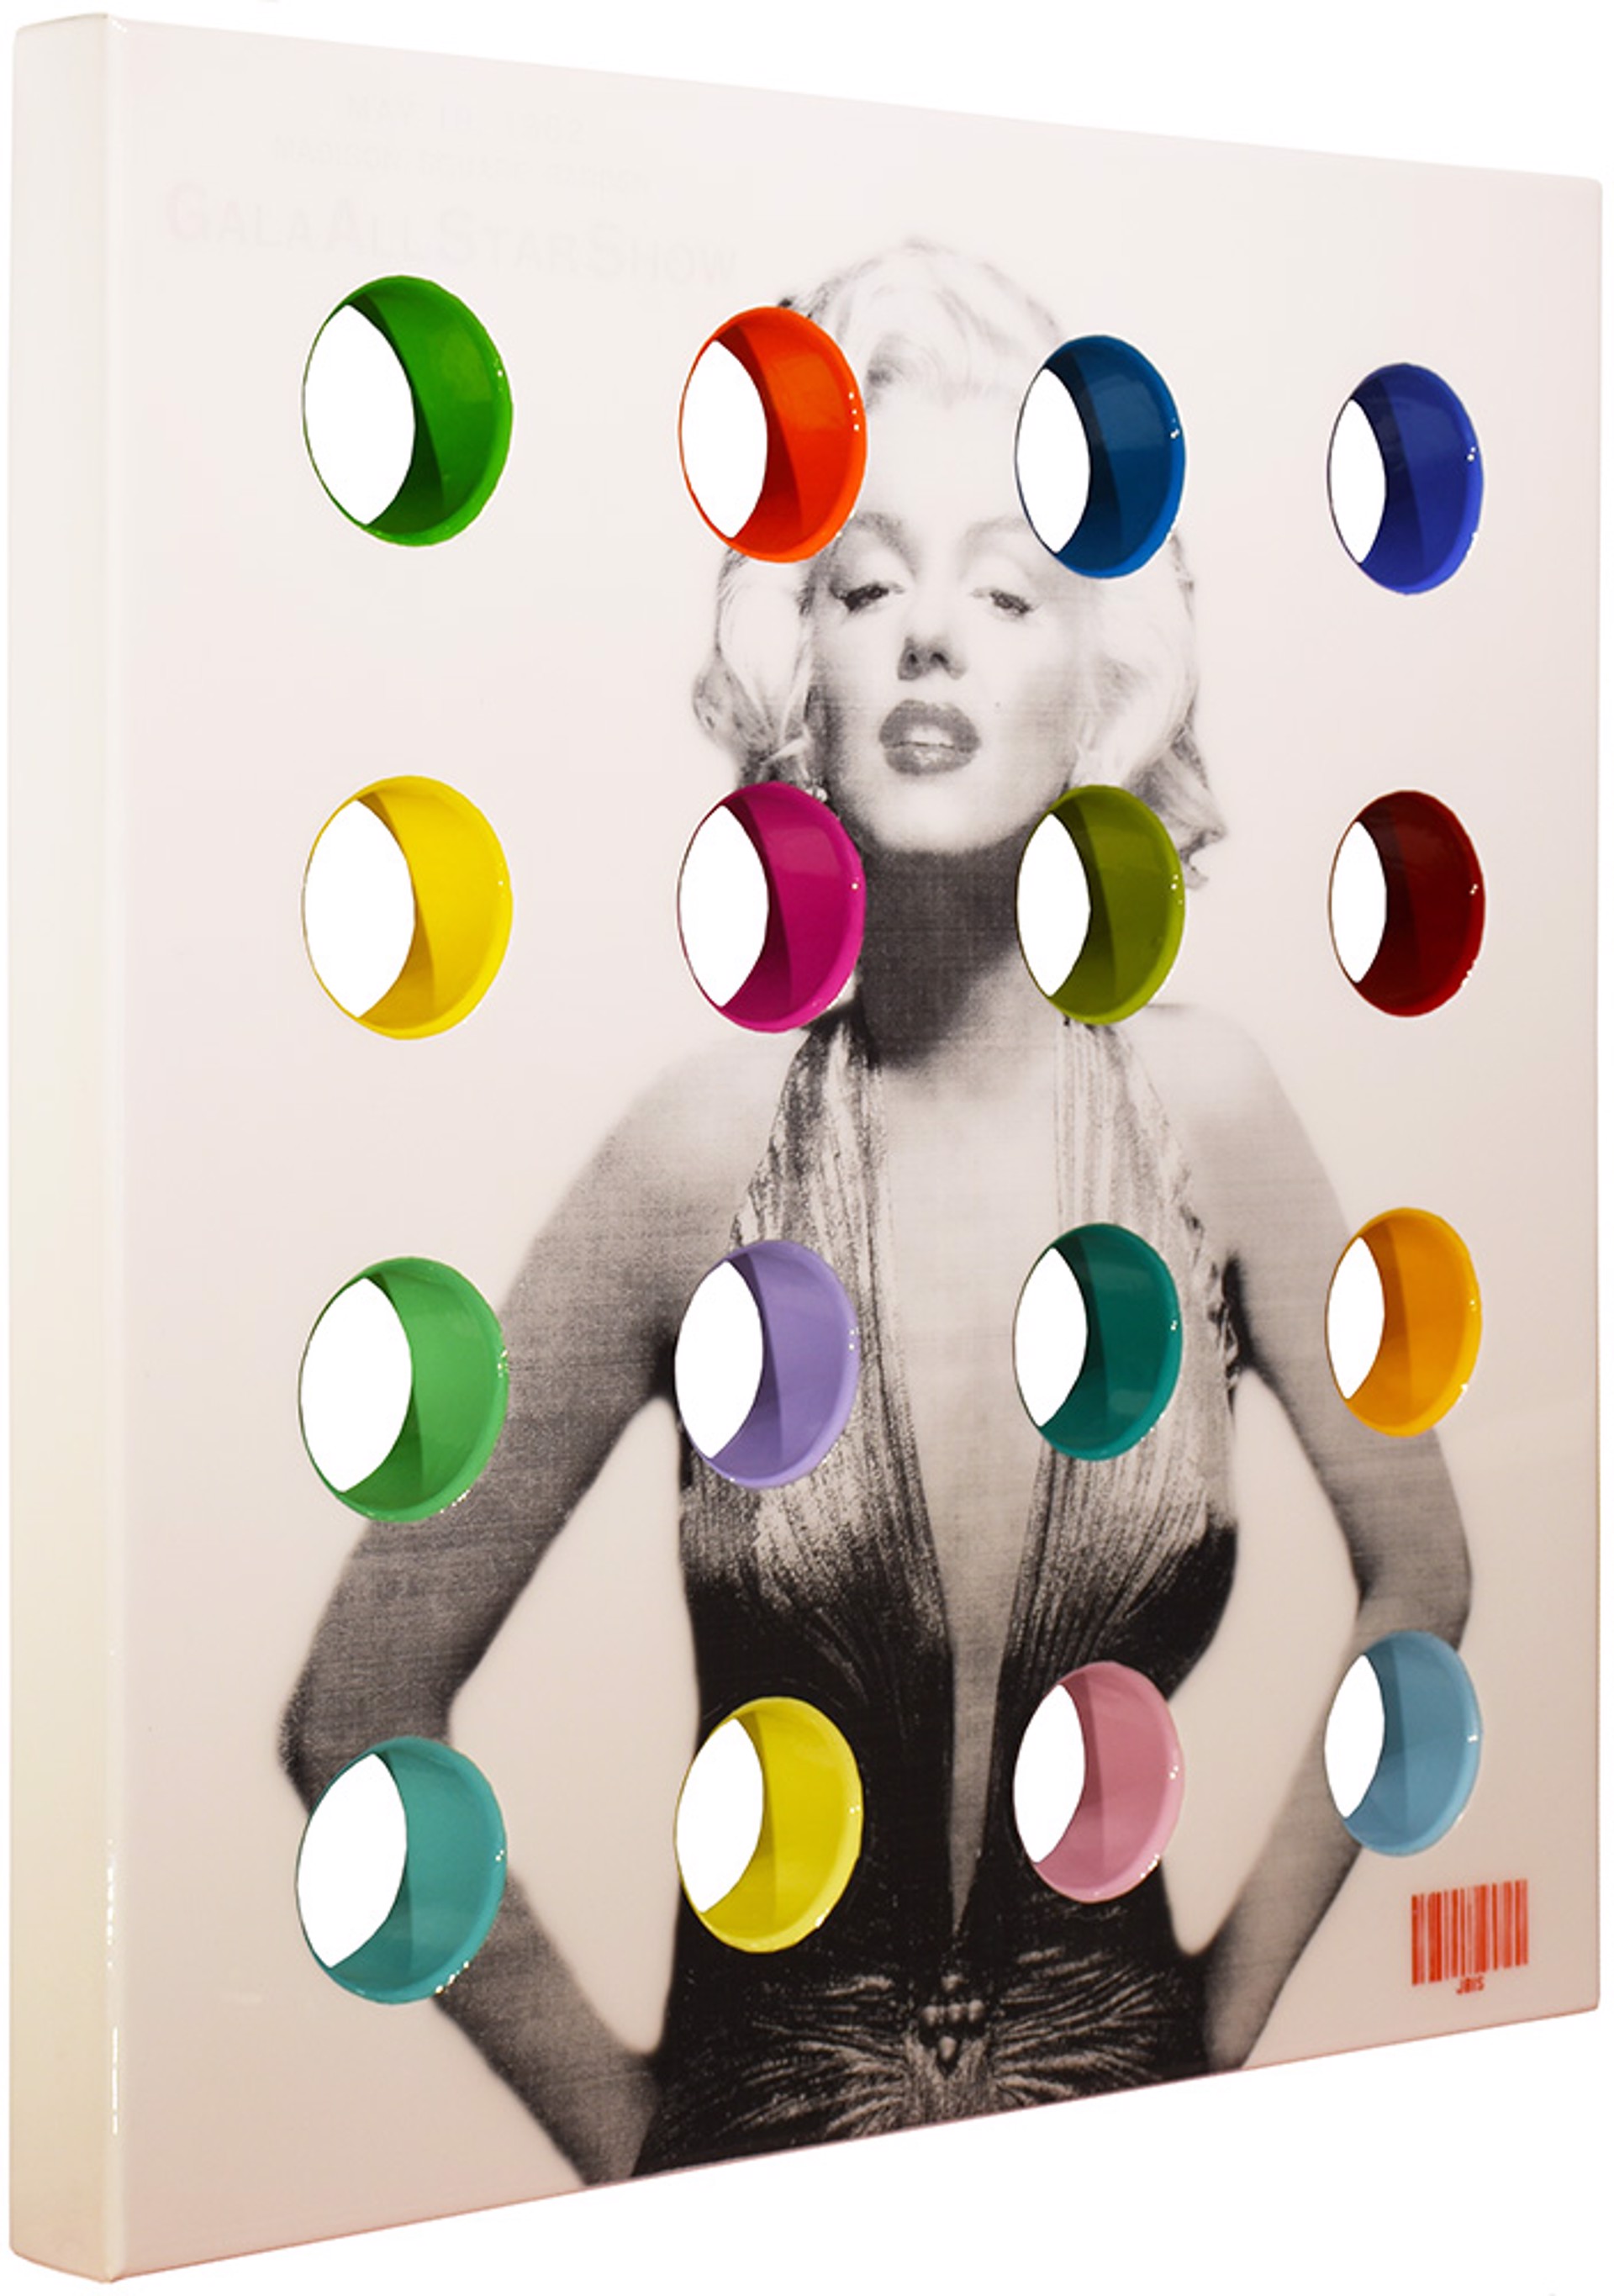 Gala (Marilyn Monroe) by Bisaillon Brothers